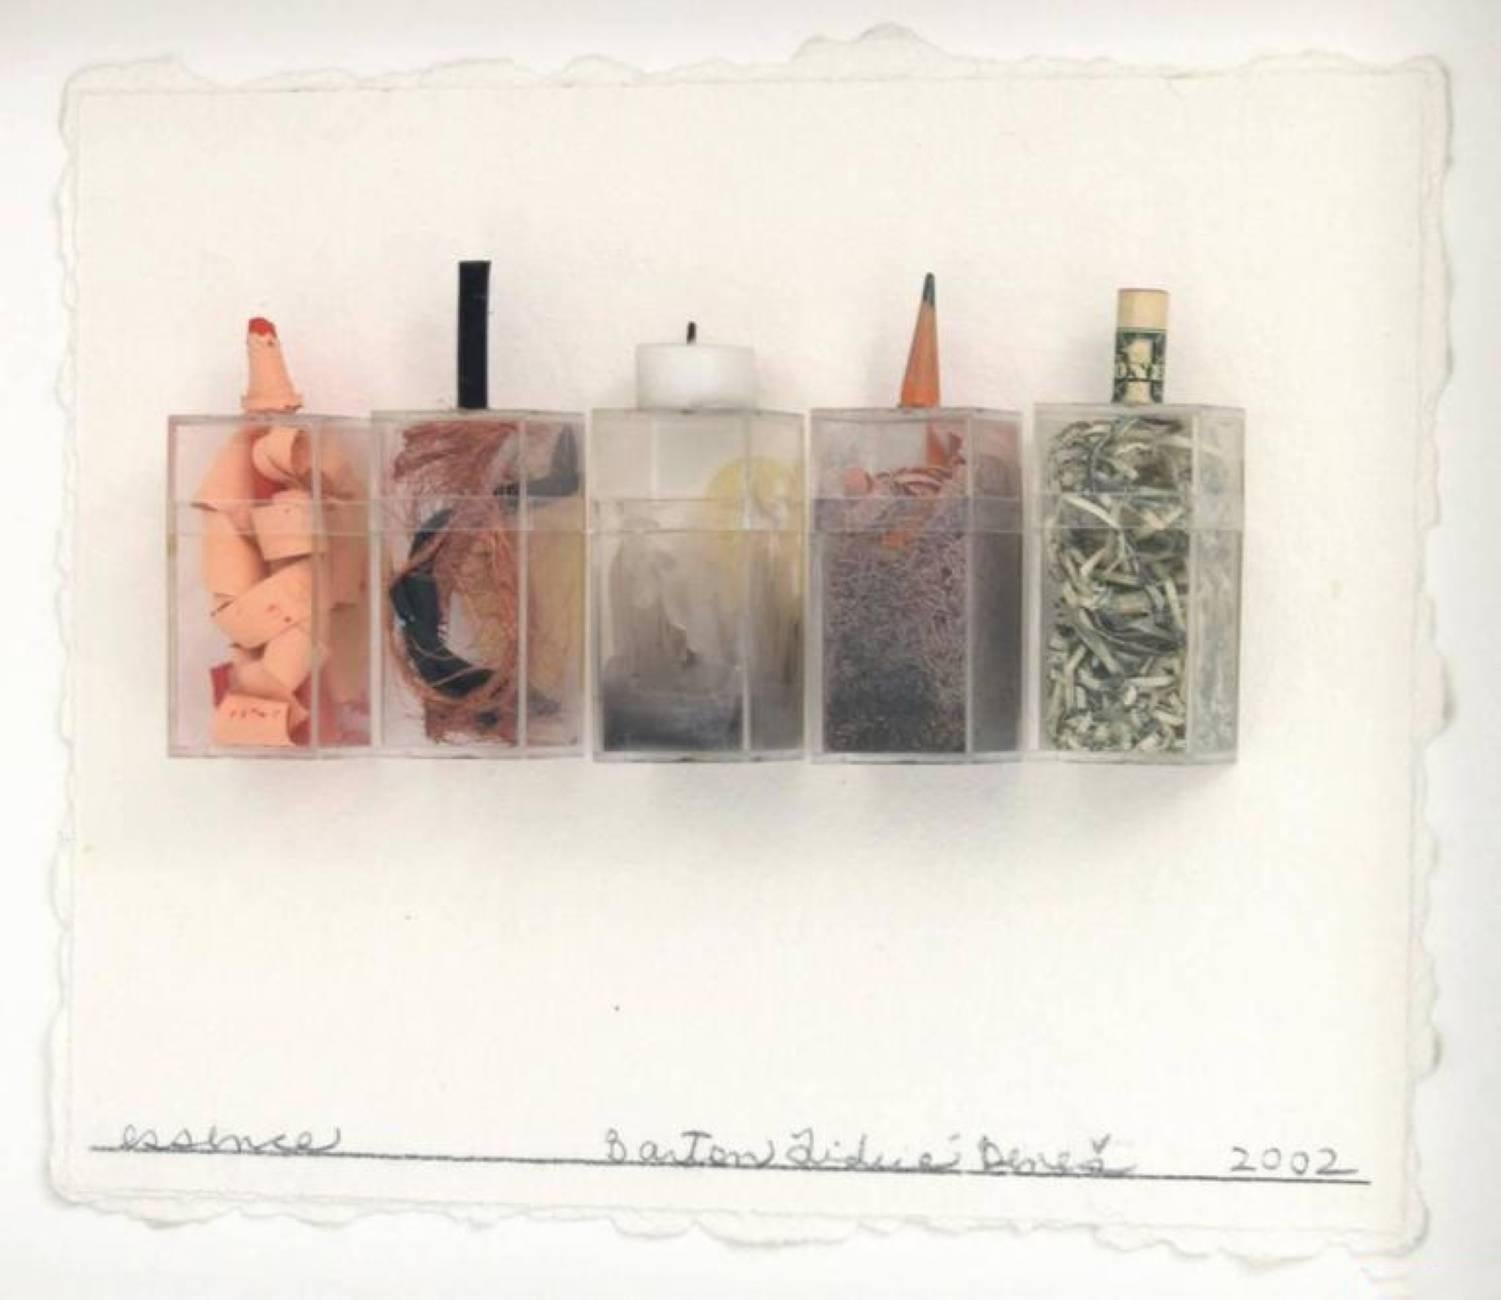 Mixed media work titled "Essence" by Barton Lidice Benes (American, 1942-2012). Provenance: Gift from the artist; The Collection of Dr. Howard Grossman, West Palm Beach, Florida. 

Materials: paper, acrylic, metal, wax, shredded currency.